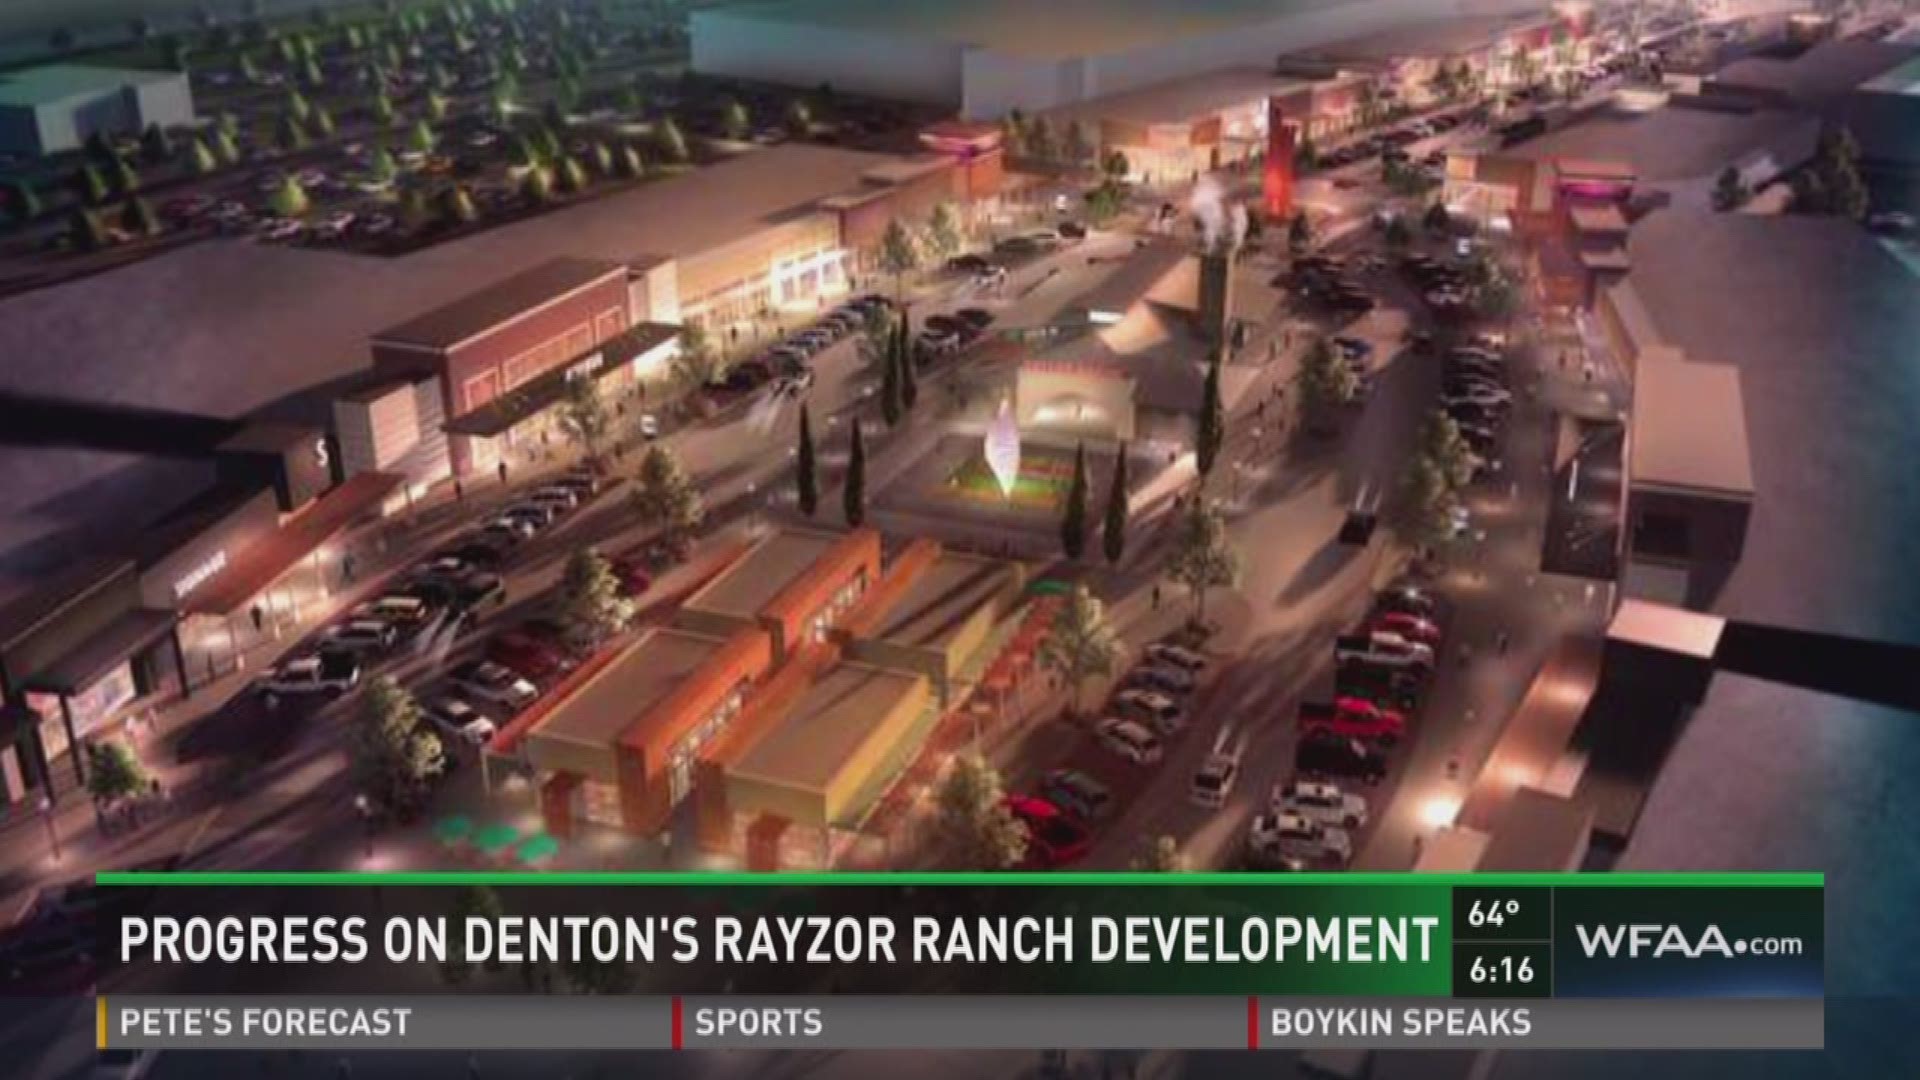 More than 400 acres of dirt near Interstate 35 in Denton is the foundation of what will become the biggest development project in Denton's history. The Rayzor Ranch development, named after the original owners of the land adjacent to Highway 380, is well 